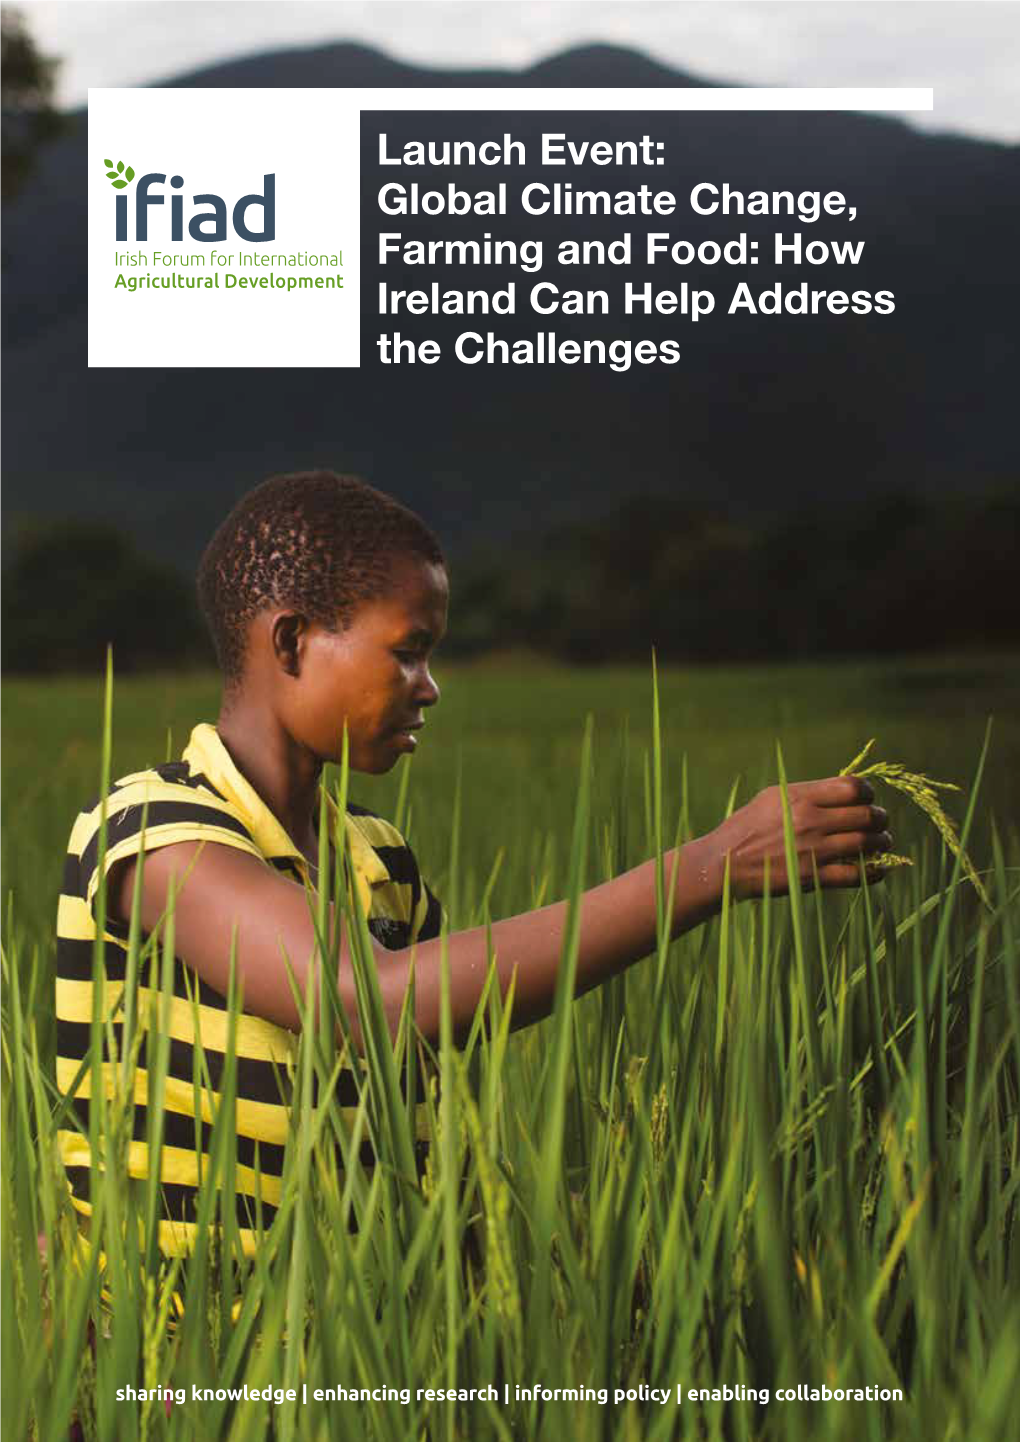 IFIAD Launch Event Document. Global Climate Change, Farming and Food